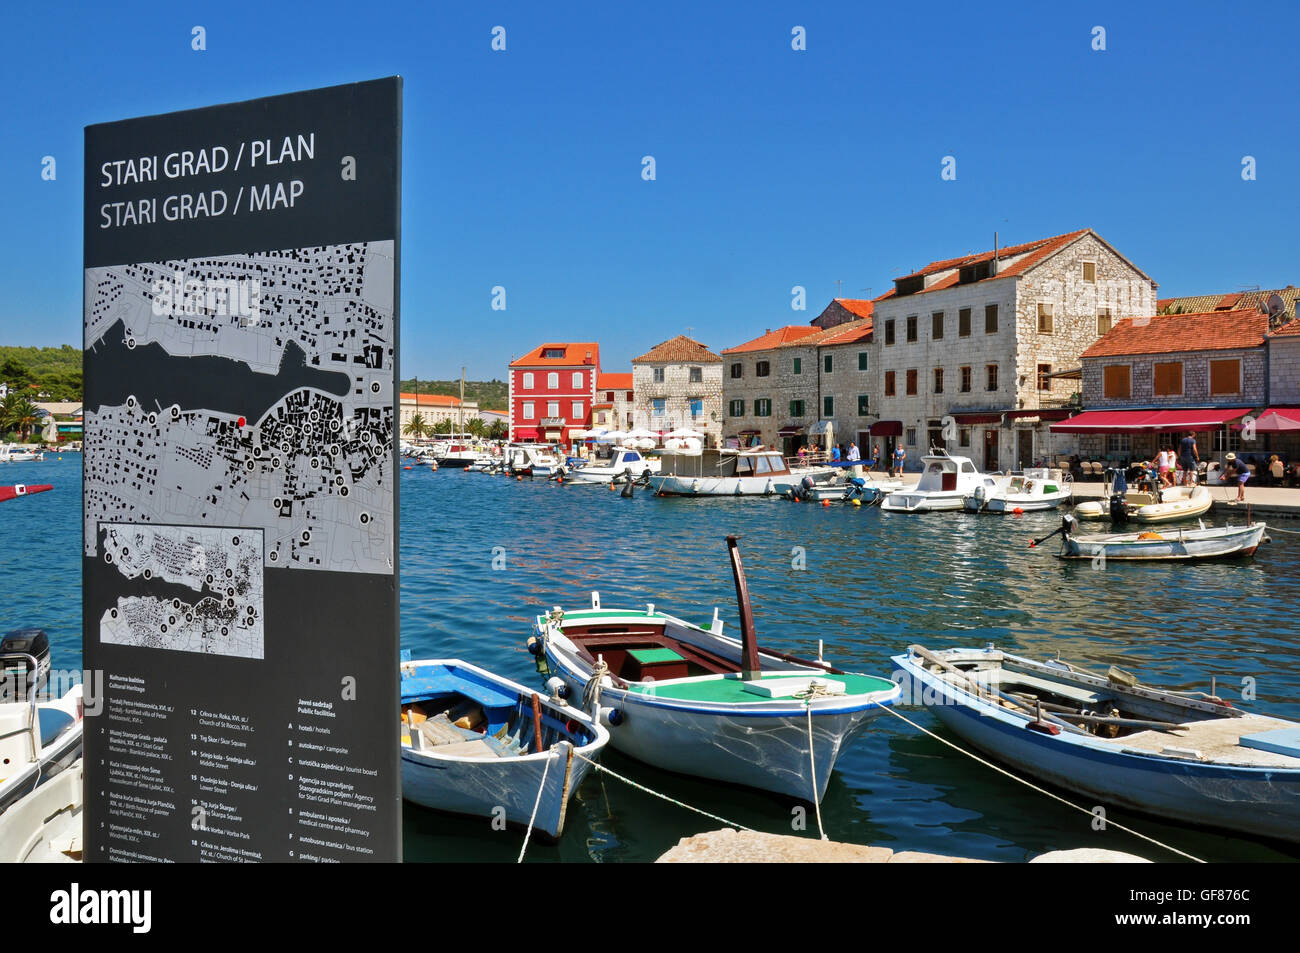 Old town with a map, Hvar, Croatia Stock Photo